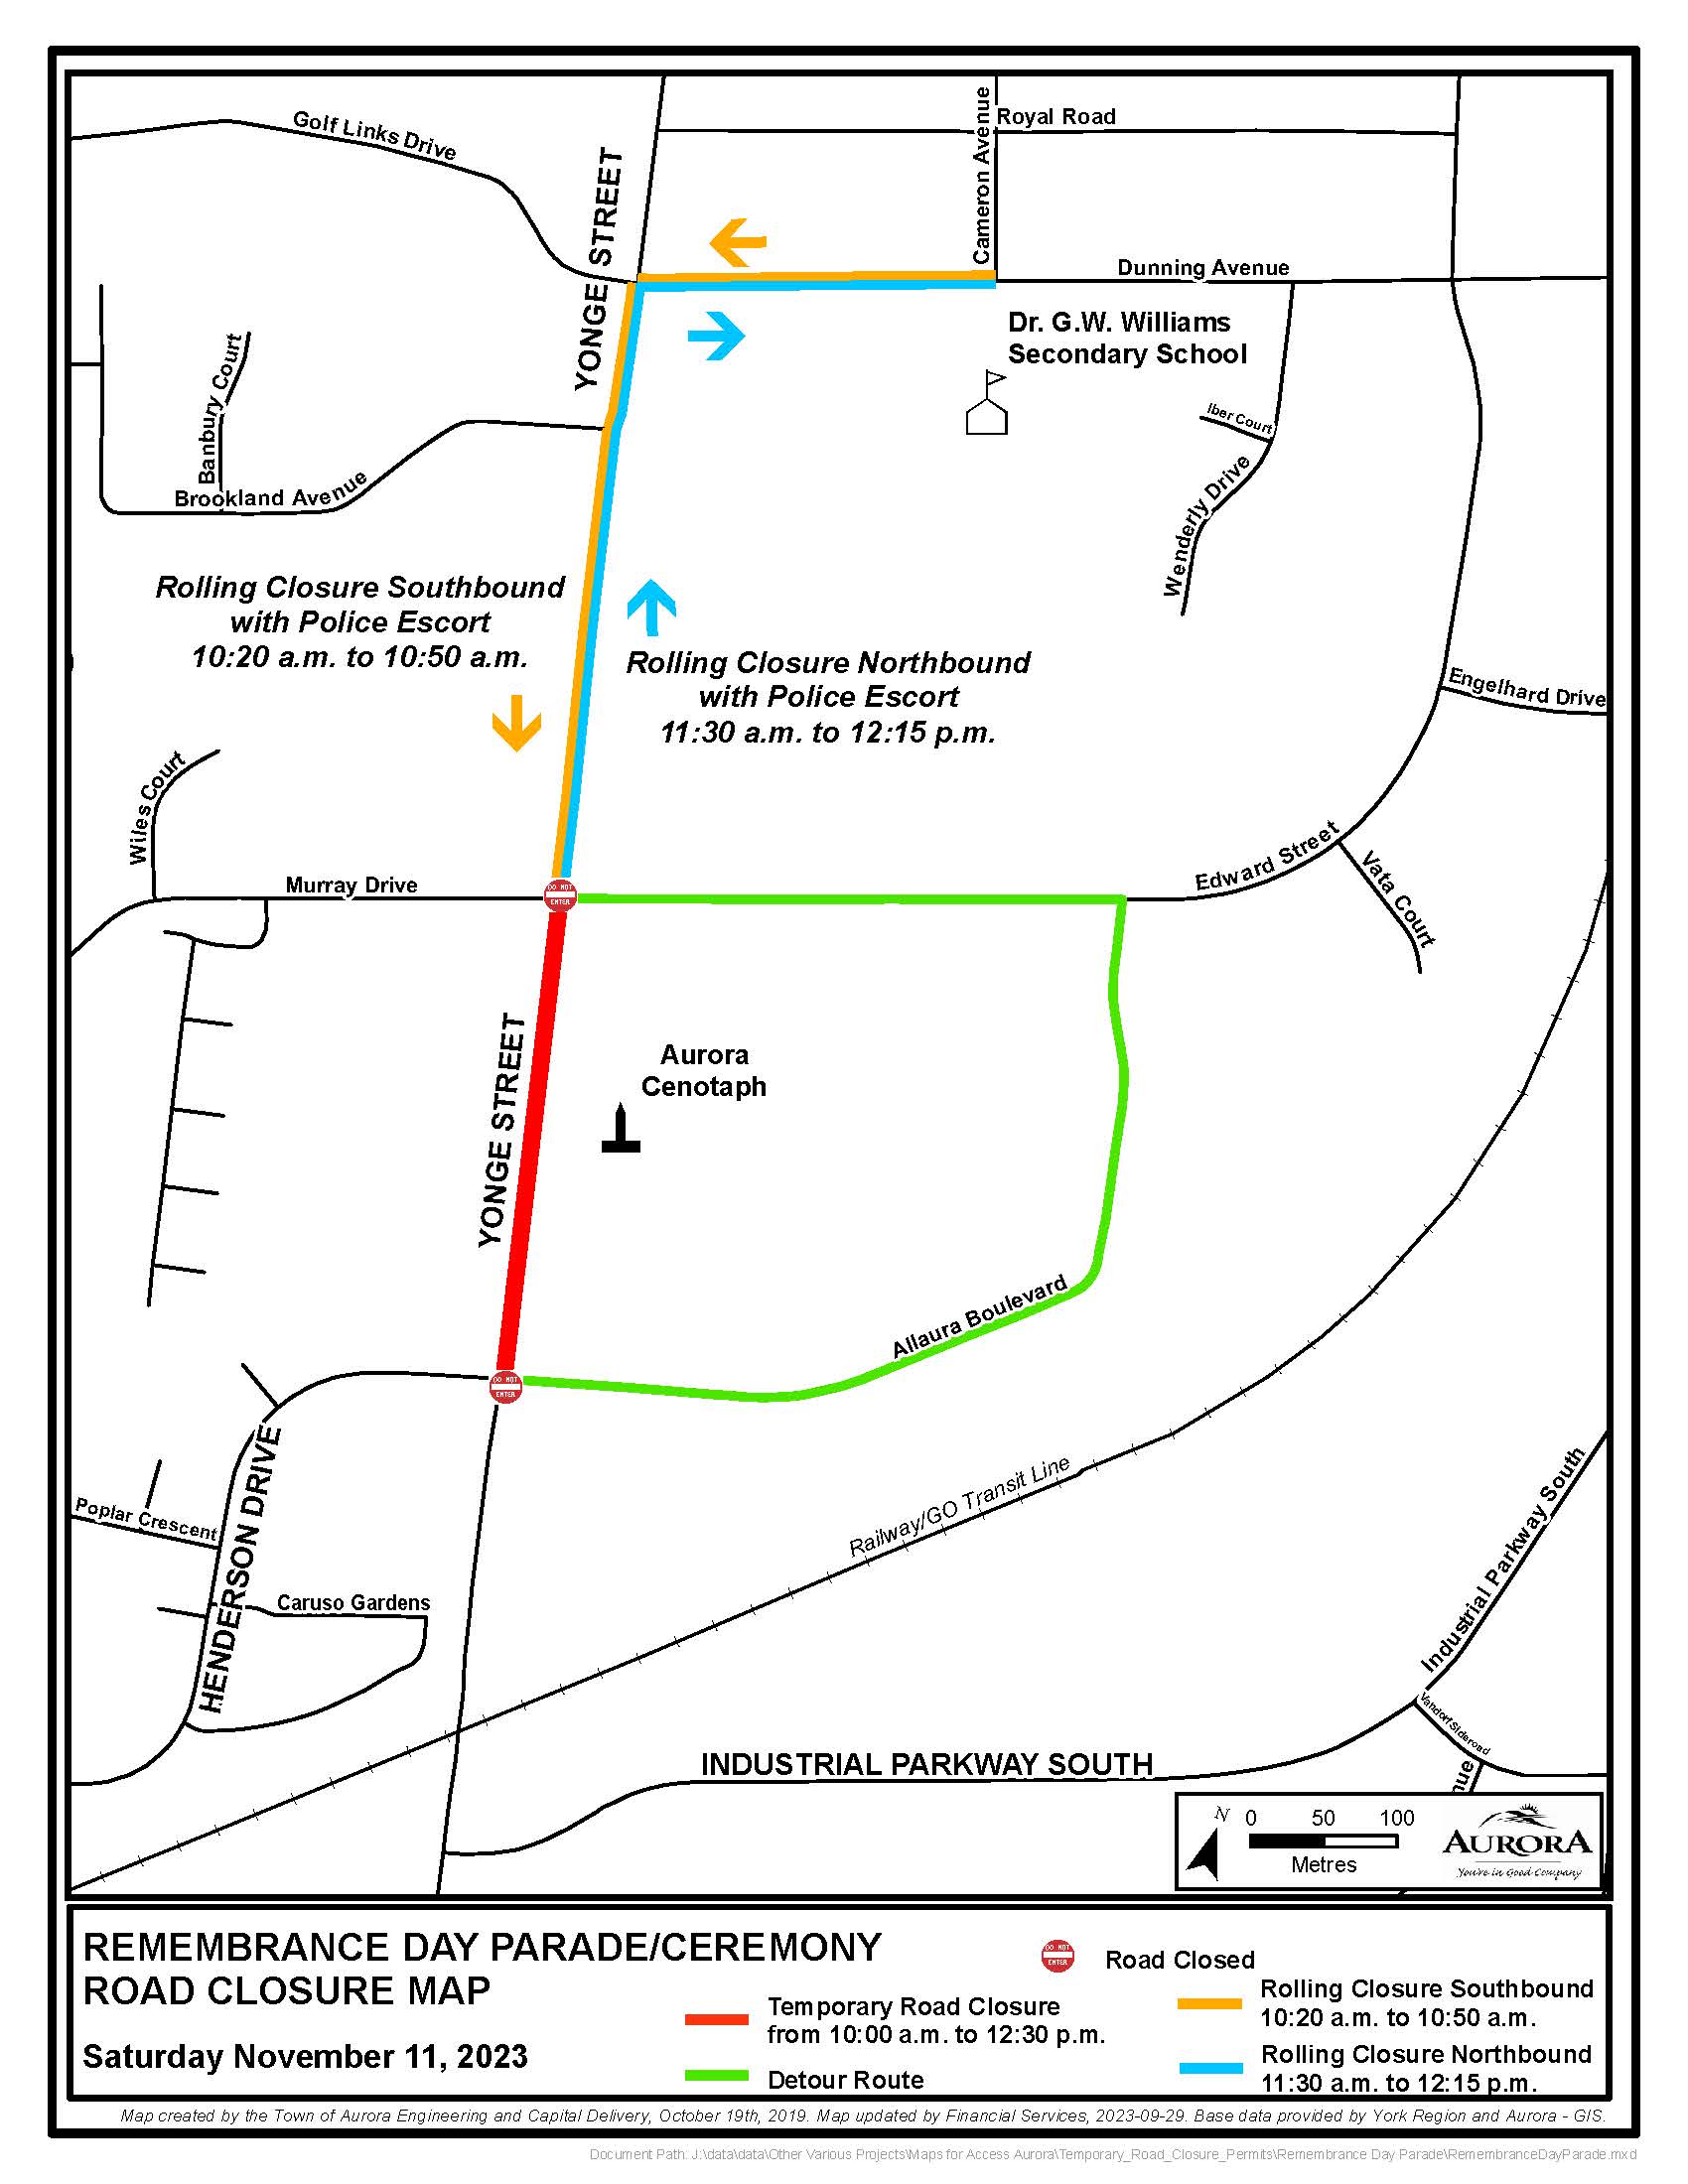 Road Closure map for remembrance Day